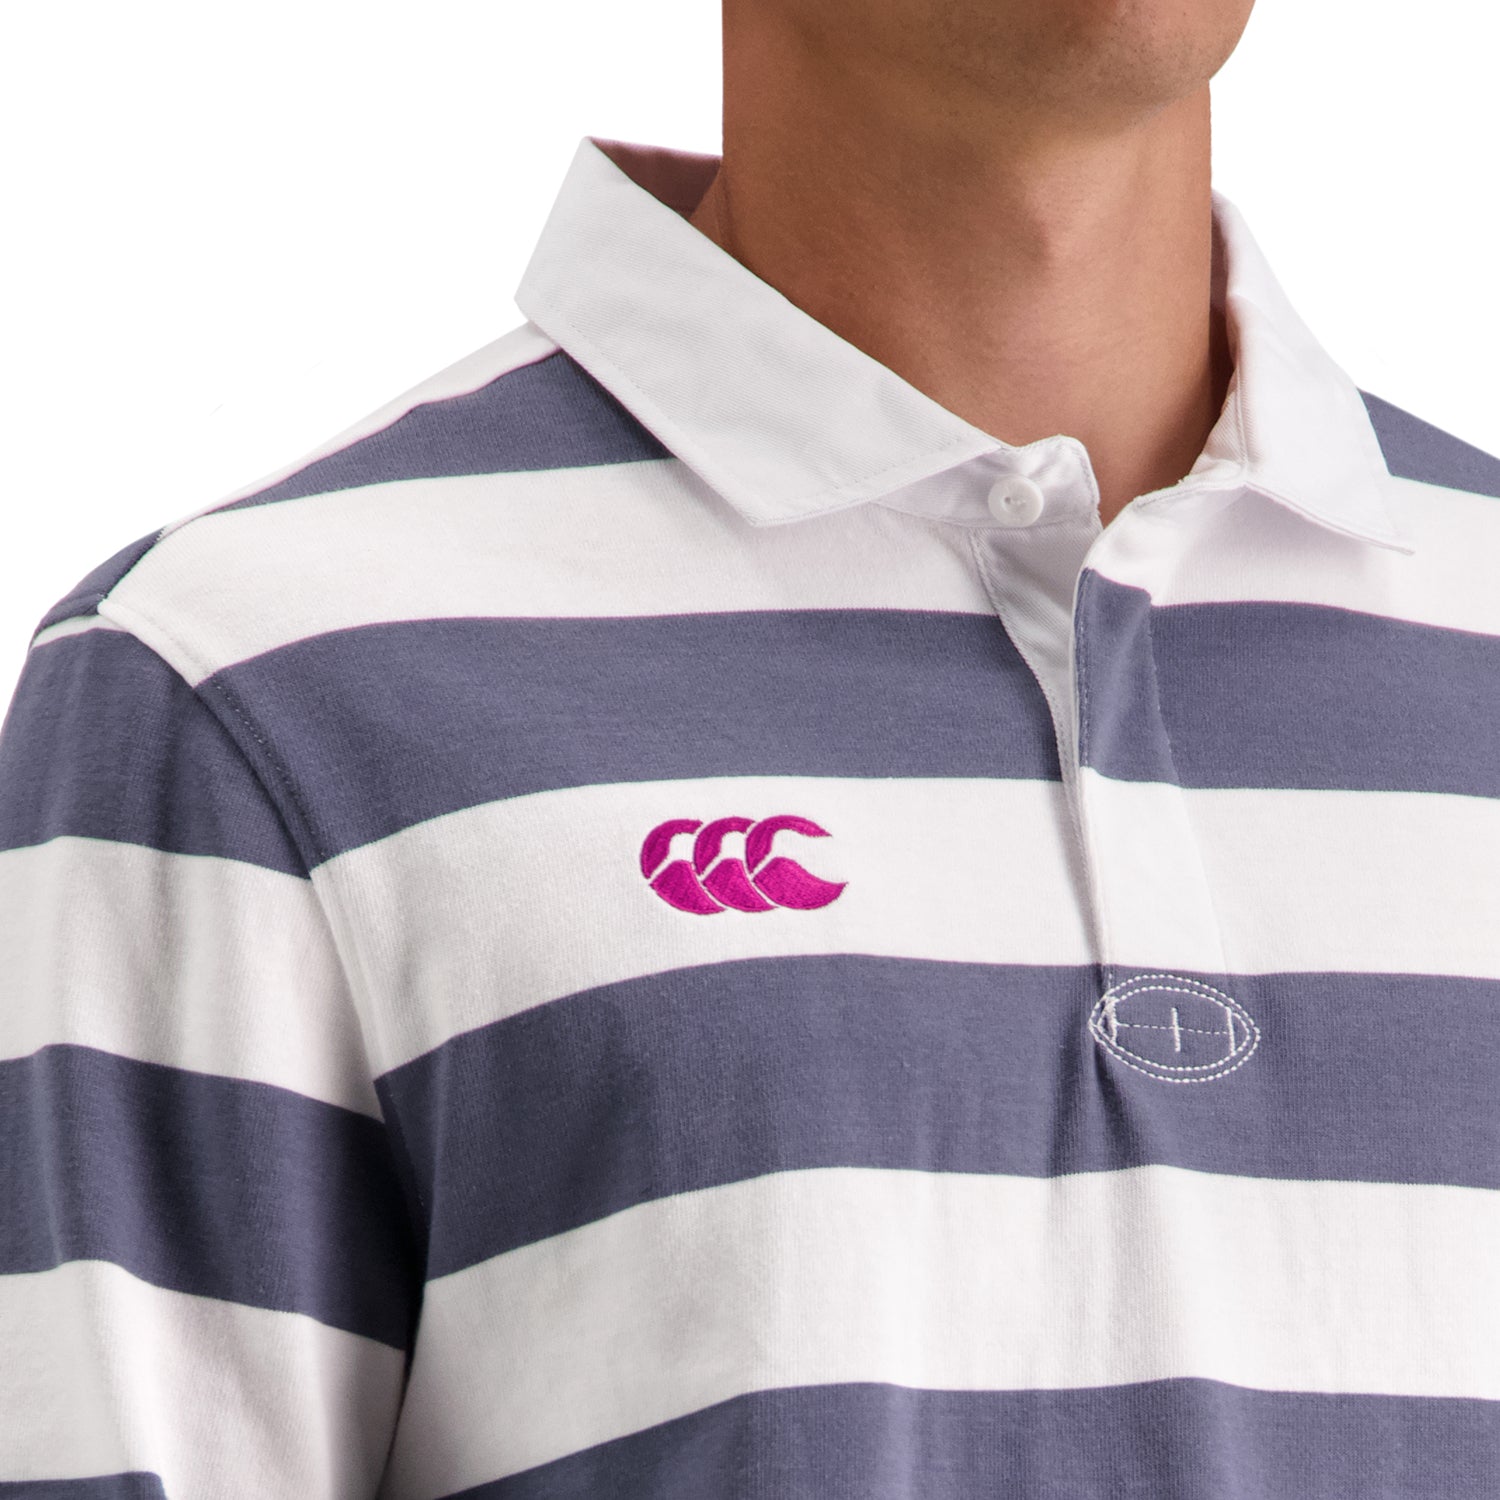 2" Hoop Rugby Jersey - The Rugby Shop Darwin